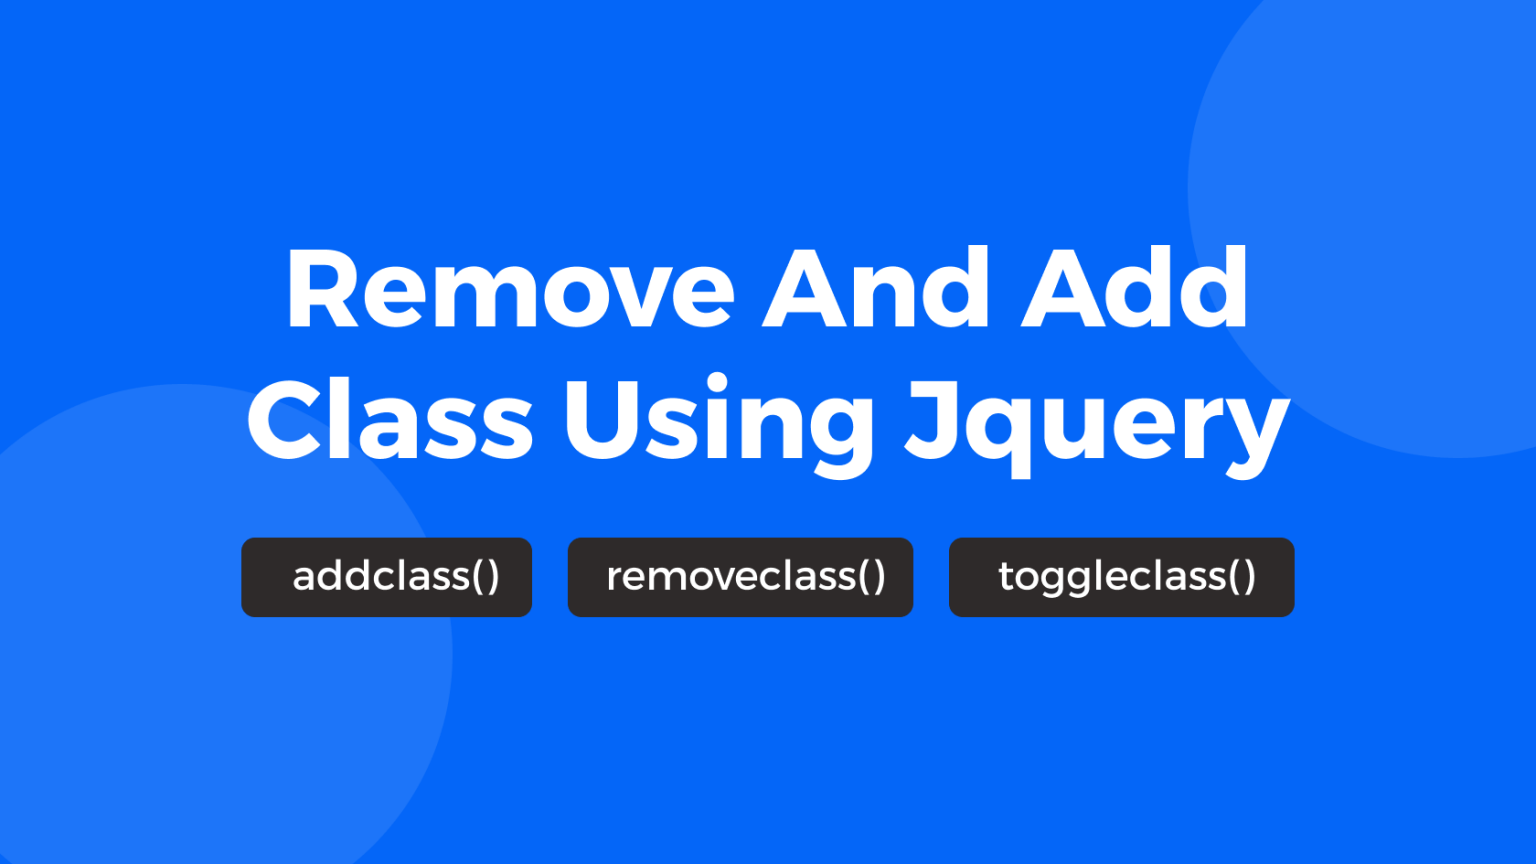 Remove and add class using jquery (Under 3 minutes)